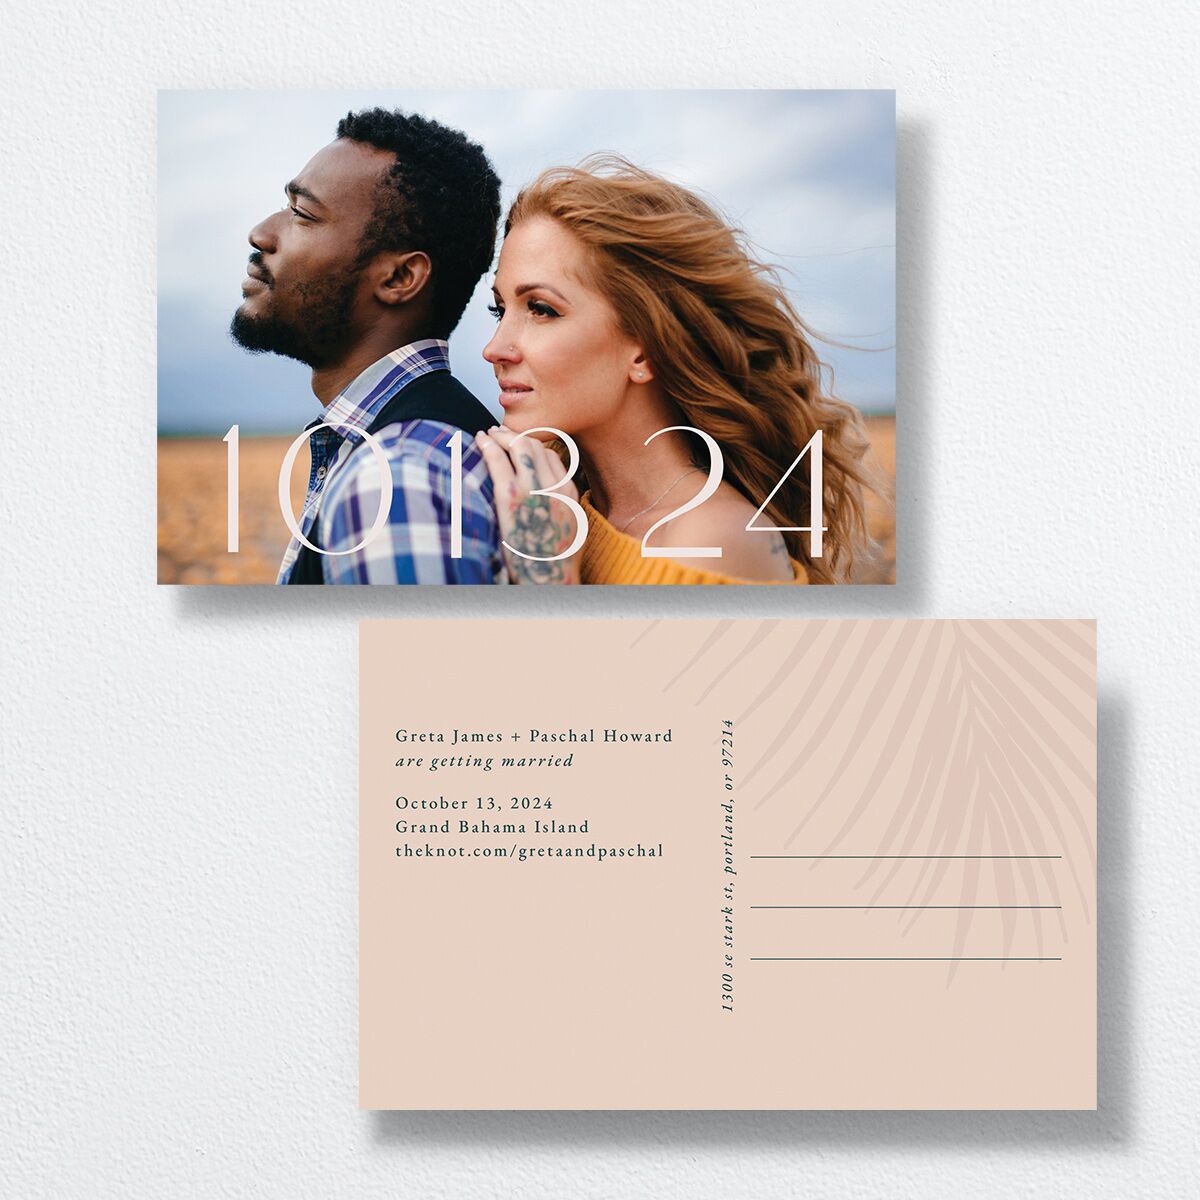 Lavish Palm Save The Date Postcards front-and-back in teal